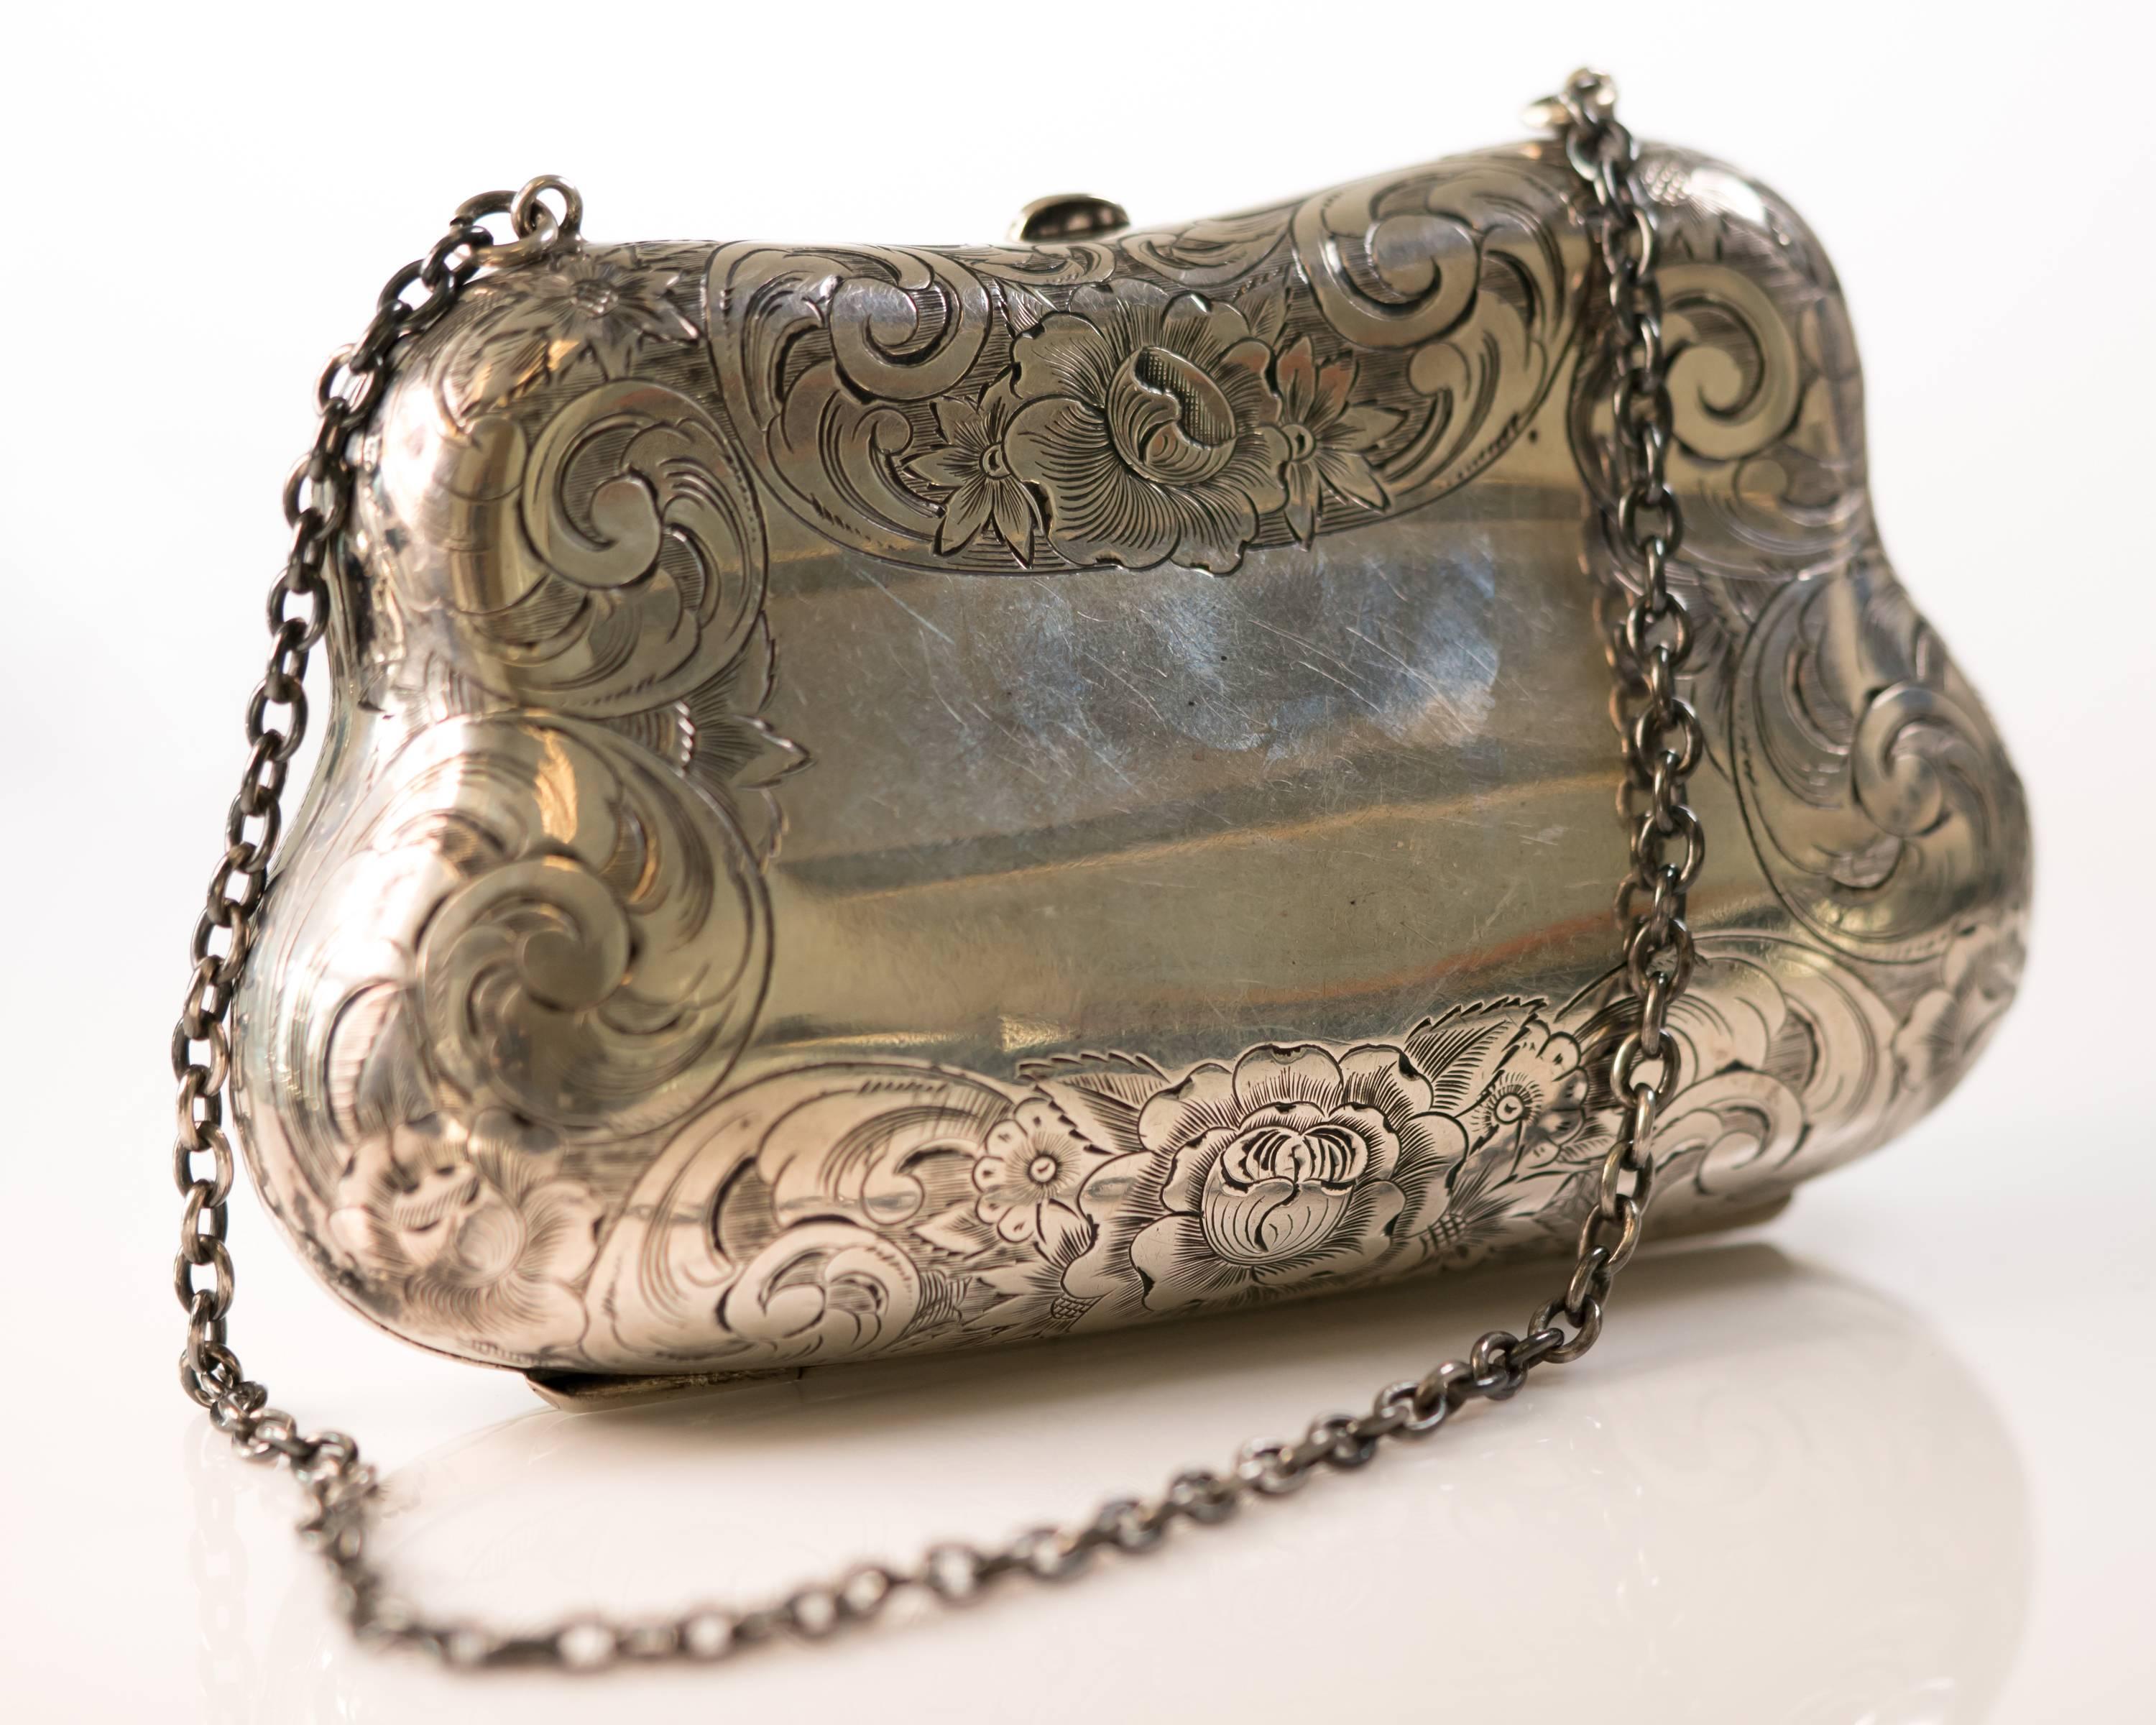 This 1940s Retro handmade Sterling Silver Clutch exterior features an engraved floral pattern on the front and back of the purse. The center front of the purse has the initials DM engraved in elegant script. The center back of the purse has an